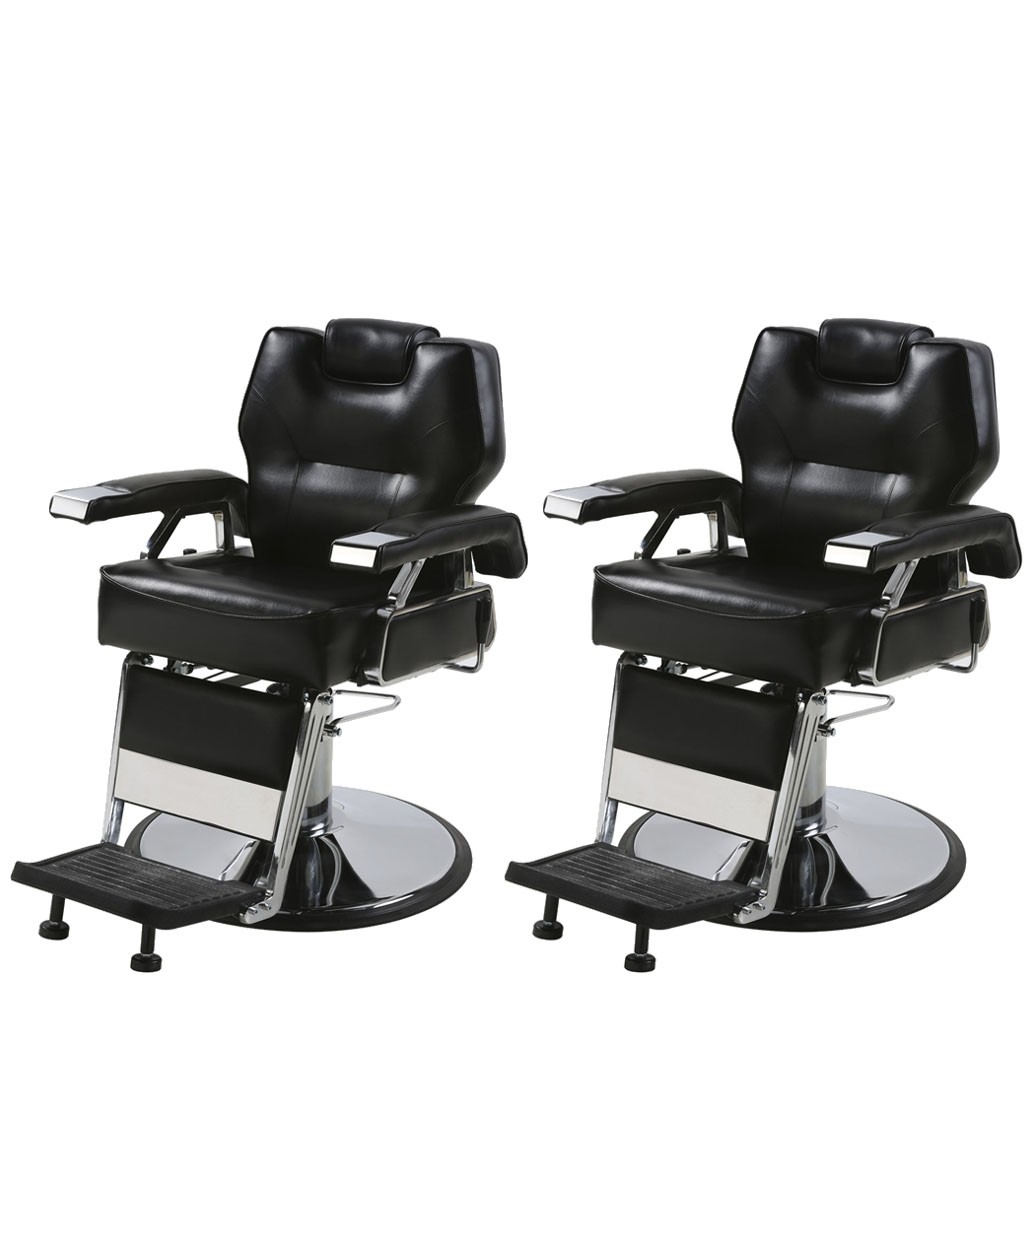 Portable Professional Heavy Duty Barber Chair Set